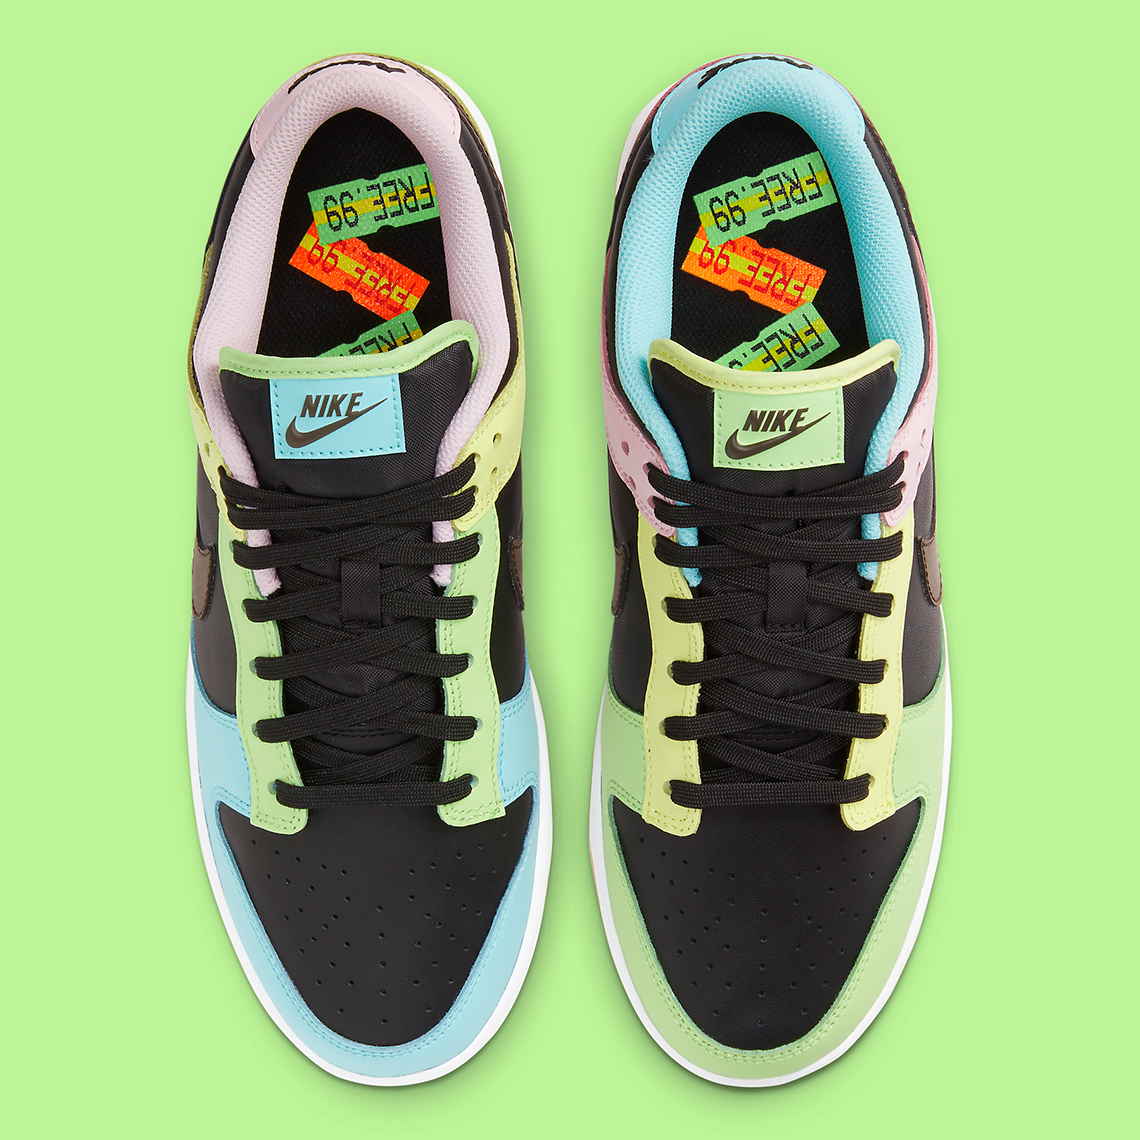 Nike Dunk Low Free 99 Dh0952 001 Official Images 10